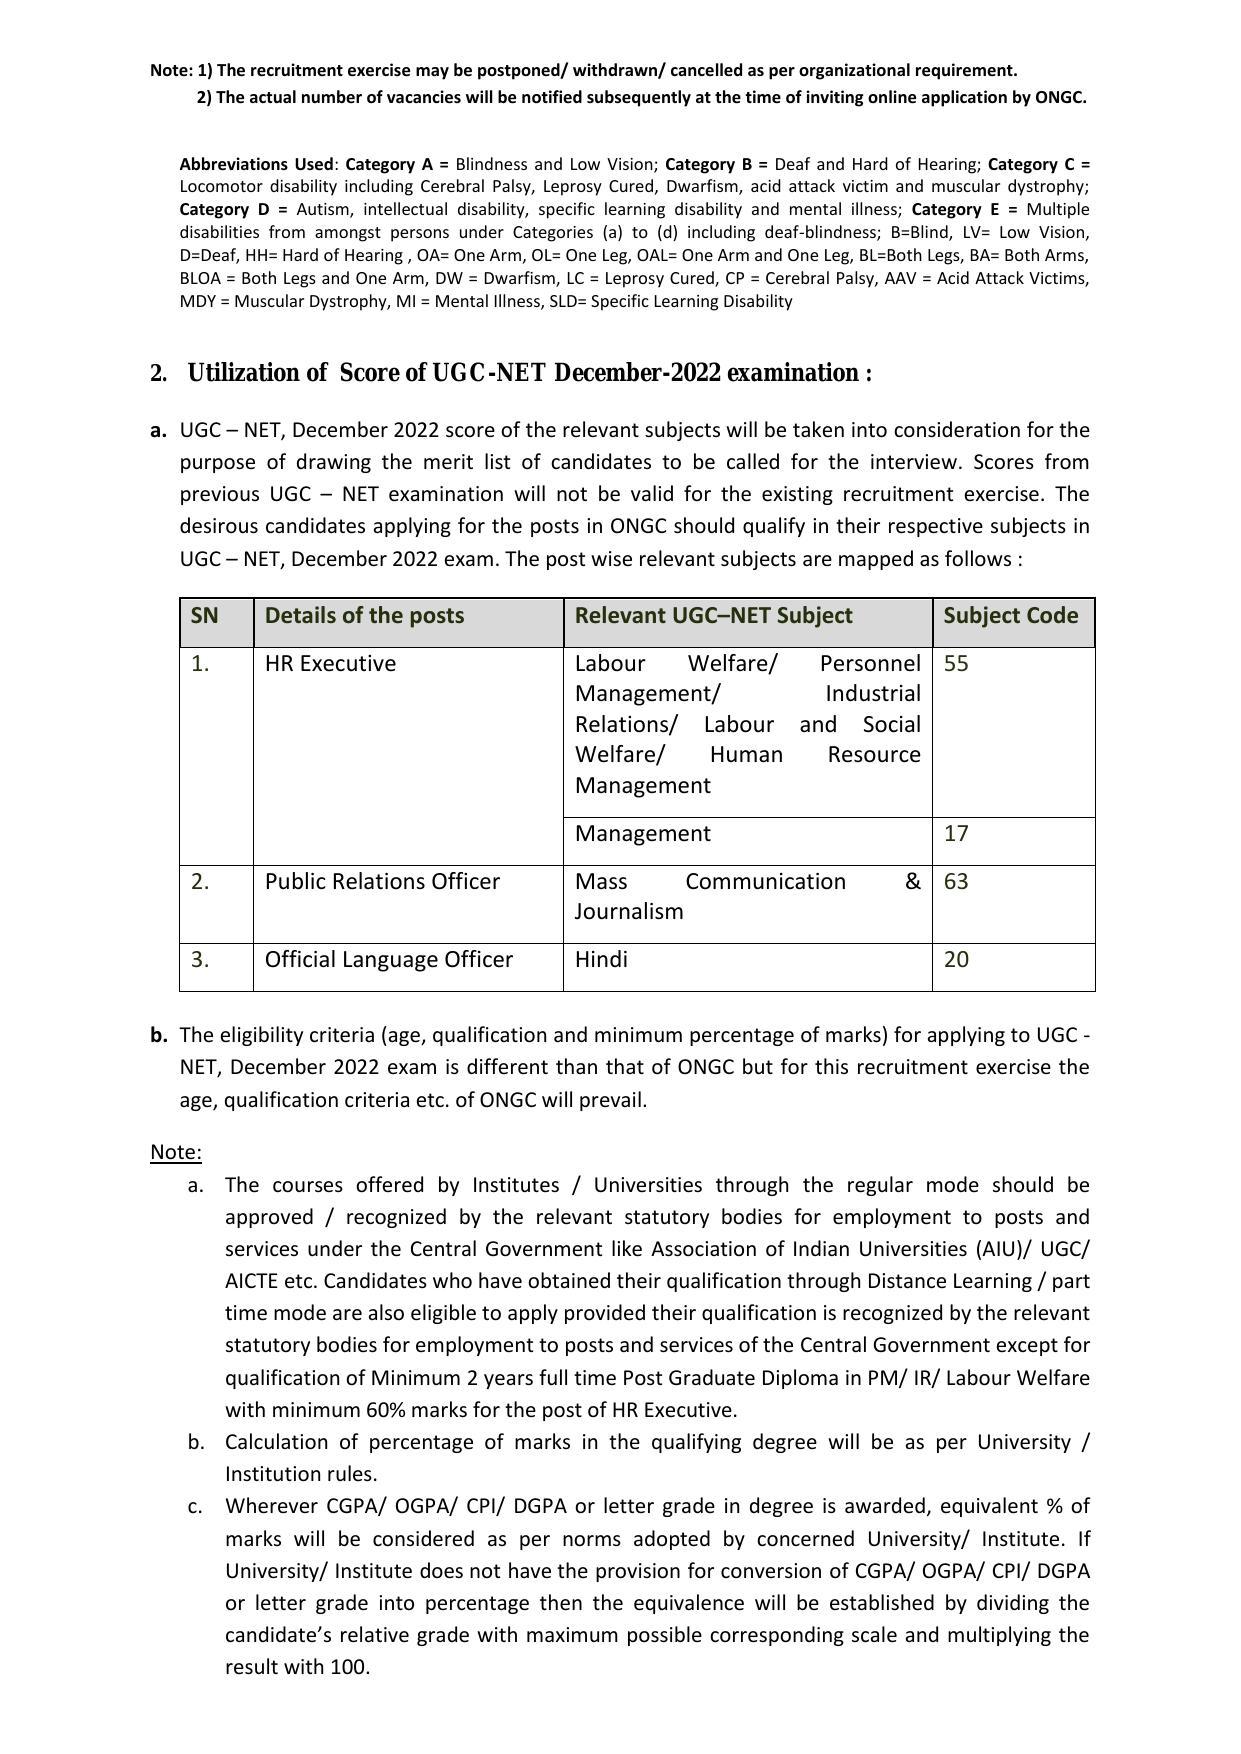 Oil and Natural Gas Corporation (ONGC) Invites Application for HR Executive, Public Relations Officer, More Vacancies Recruitment 2023 - Page 1